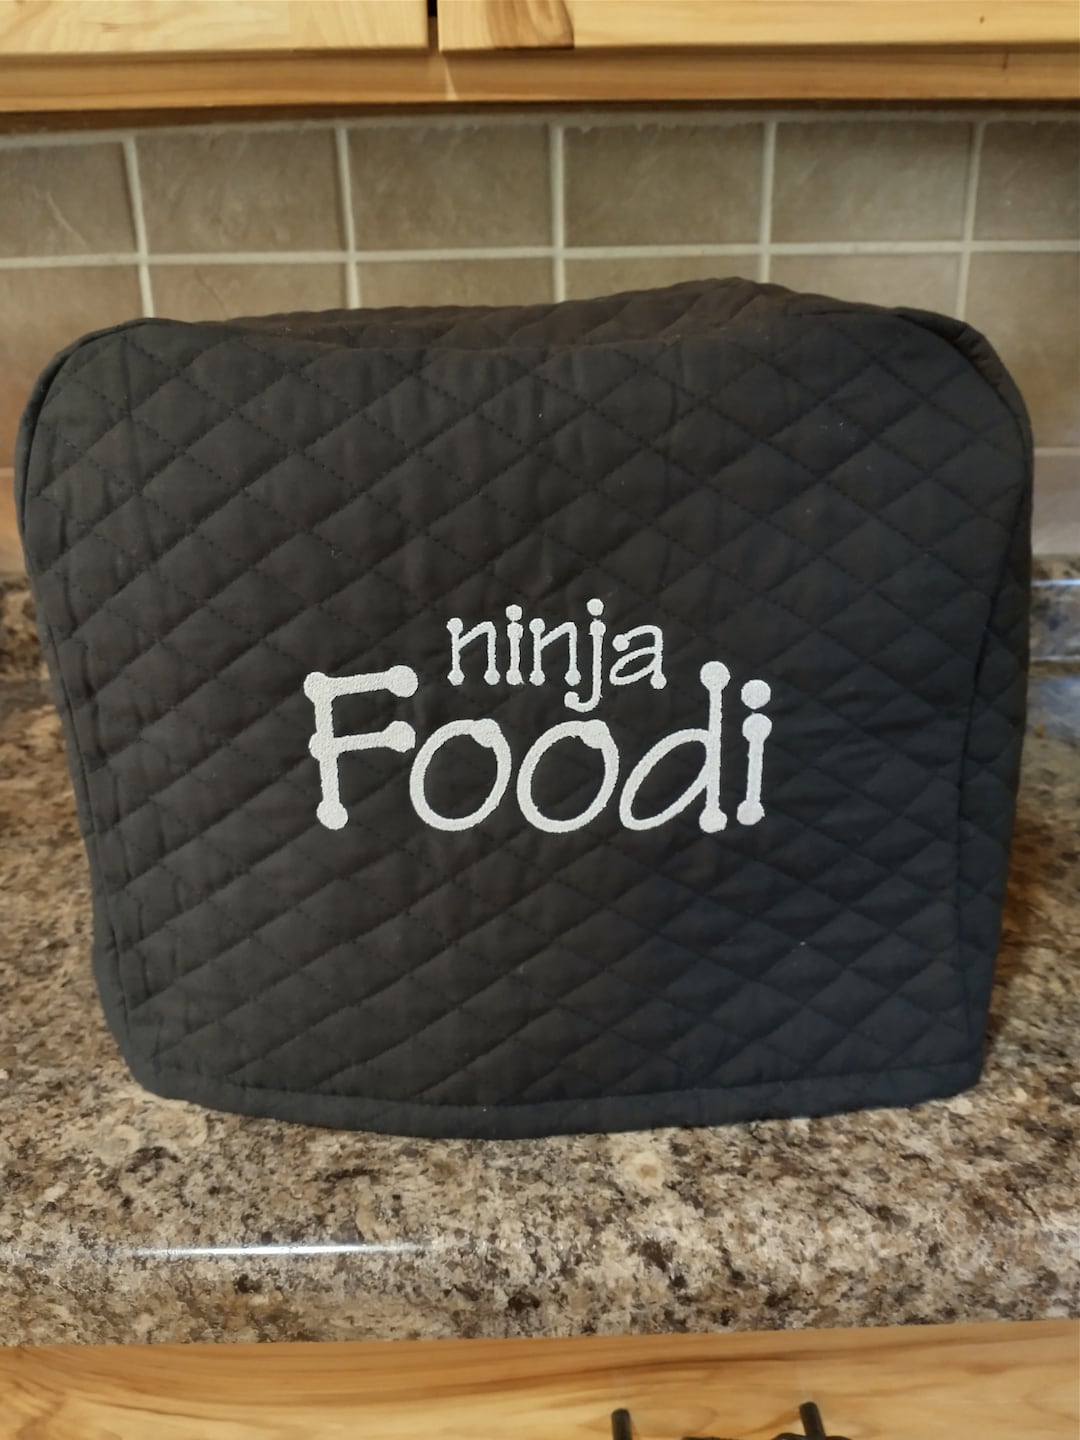 Ninja Foodi 10-in-1 XL Pro Air Fry Oven Appliance Cover, Dust